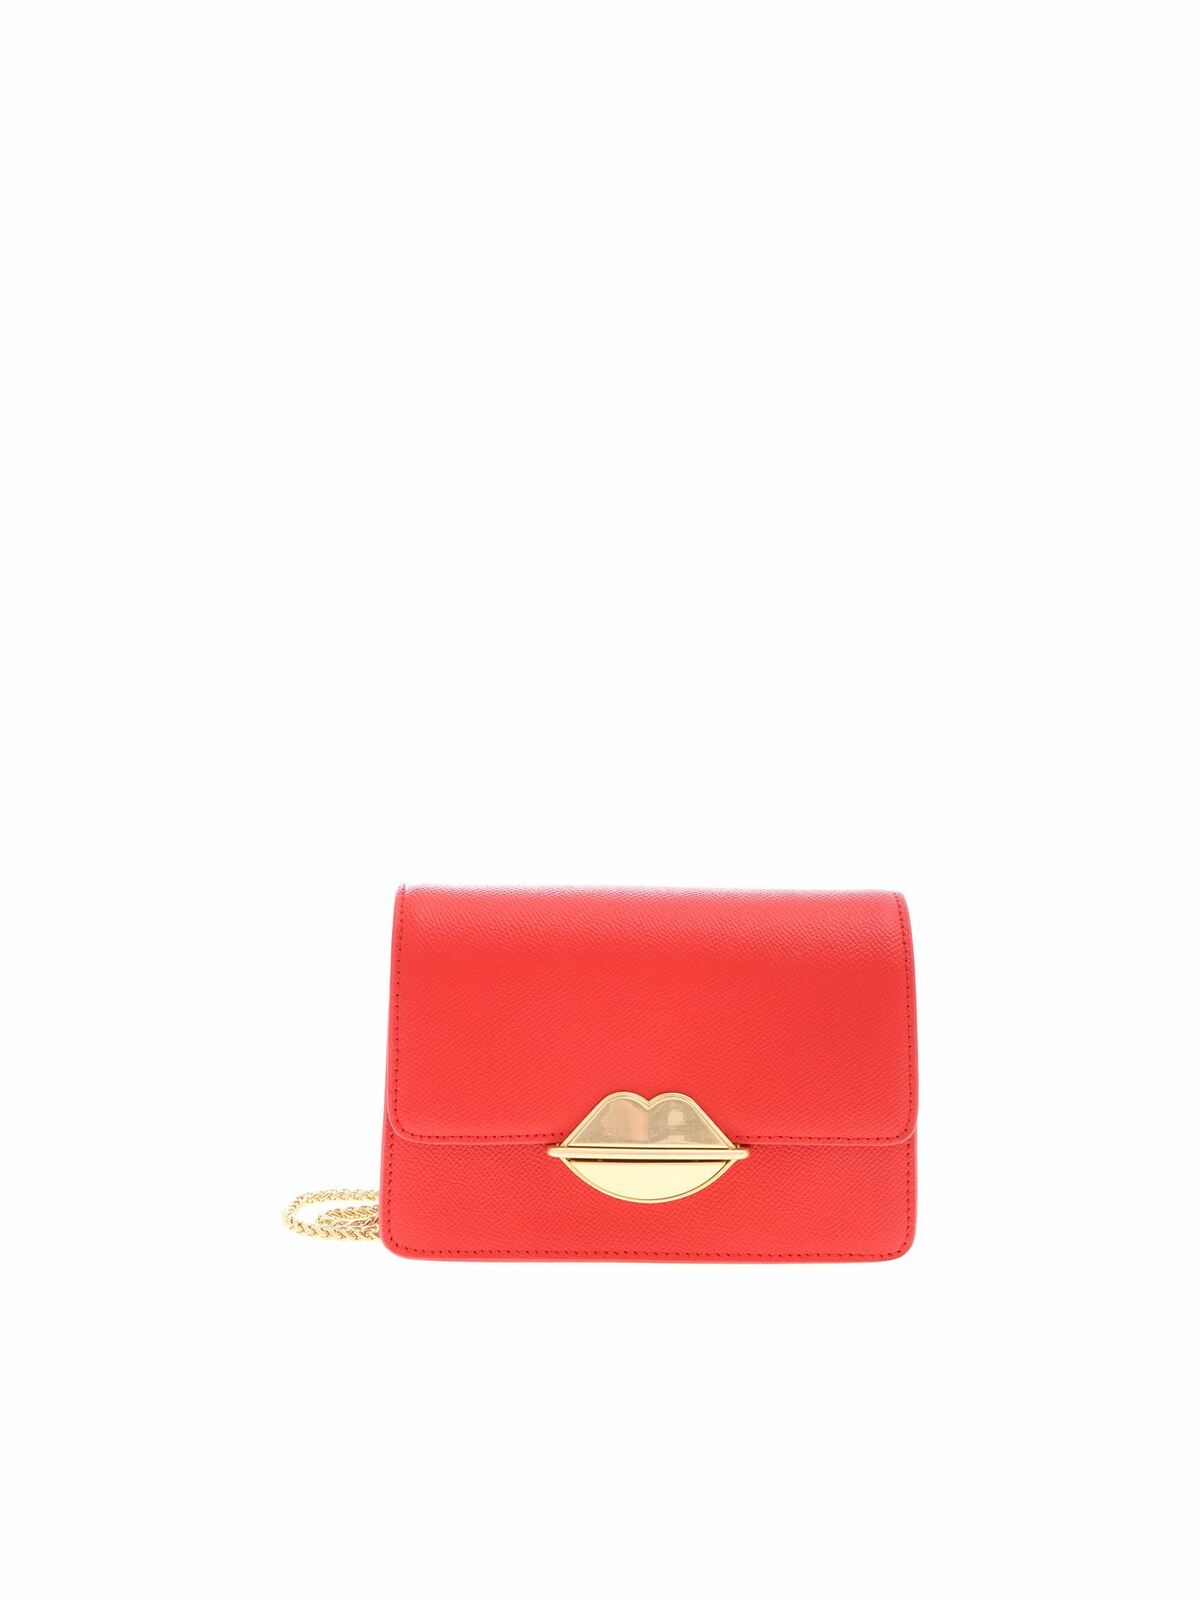 Lulu Guinness Polly Bag In Red Hammered Leather In Rojo